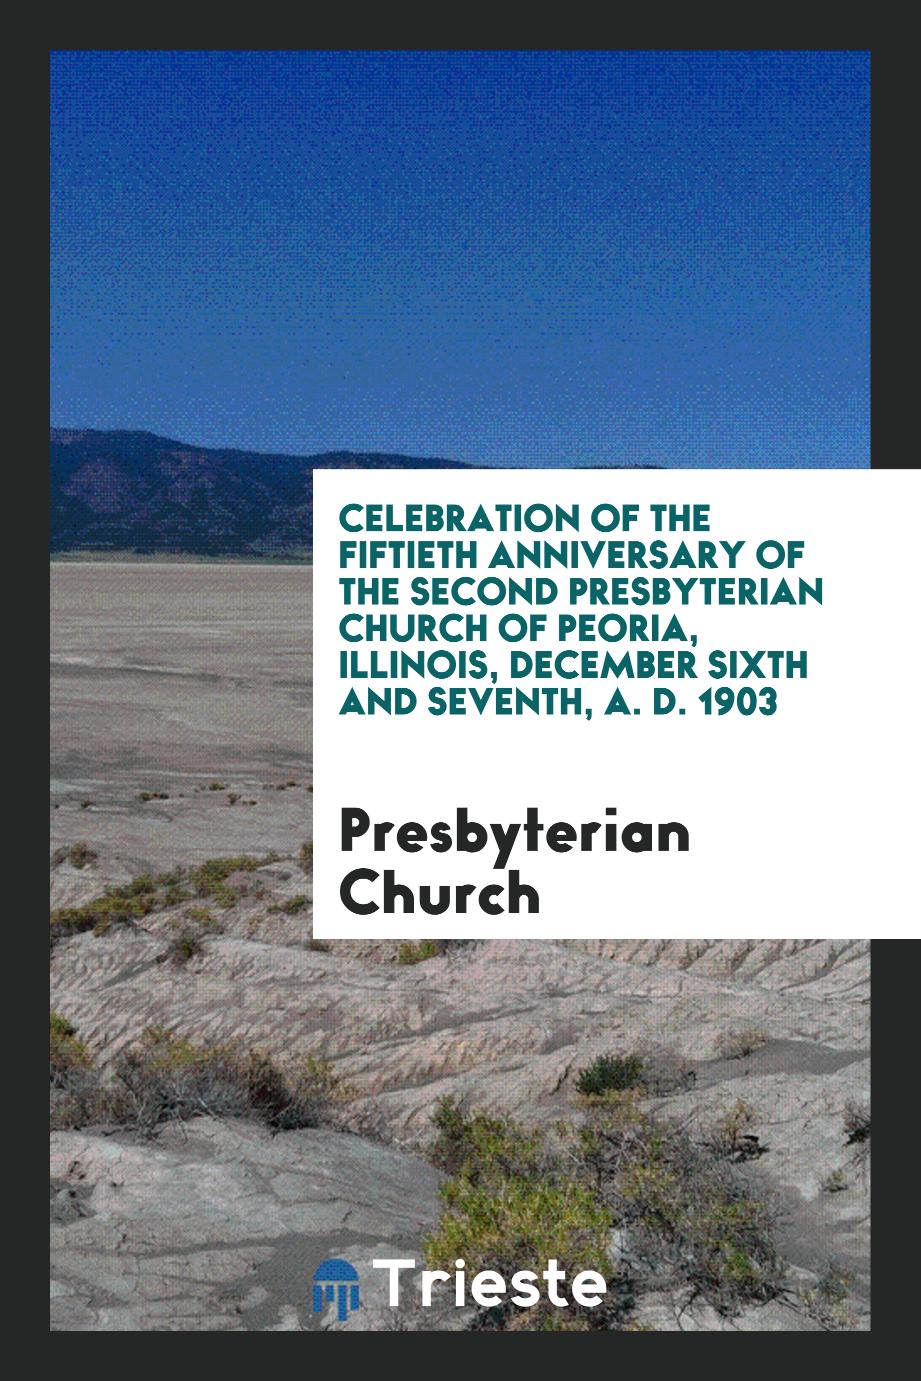 Celebration of the Fiftieth Anniversary of the Second Presbyterian Church of Peoria, Illinois, December Sixth and Seventh, A. D. 1903